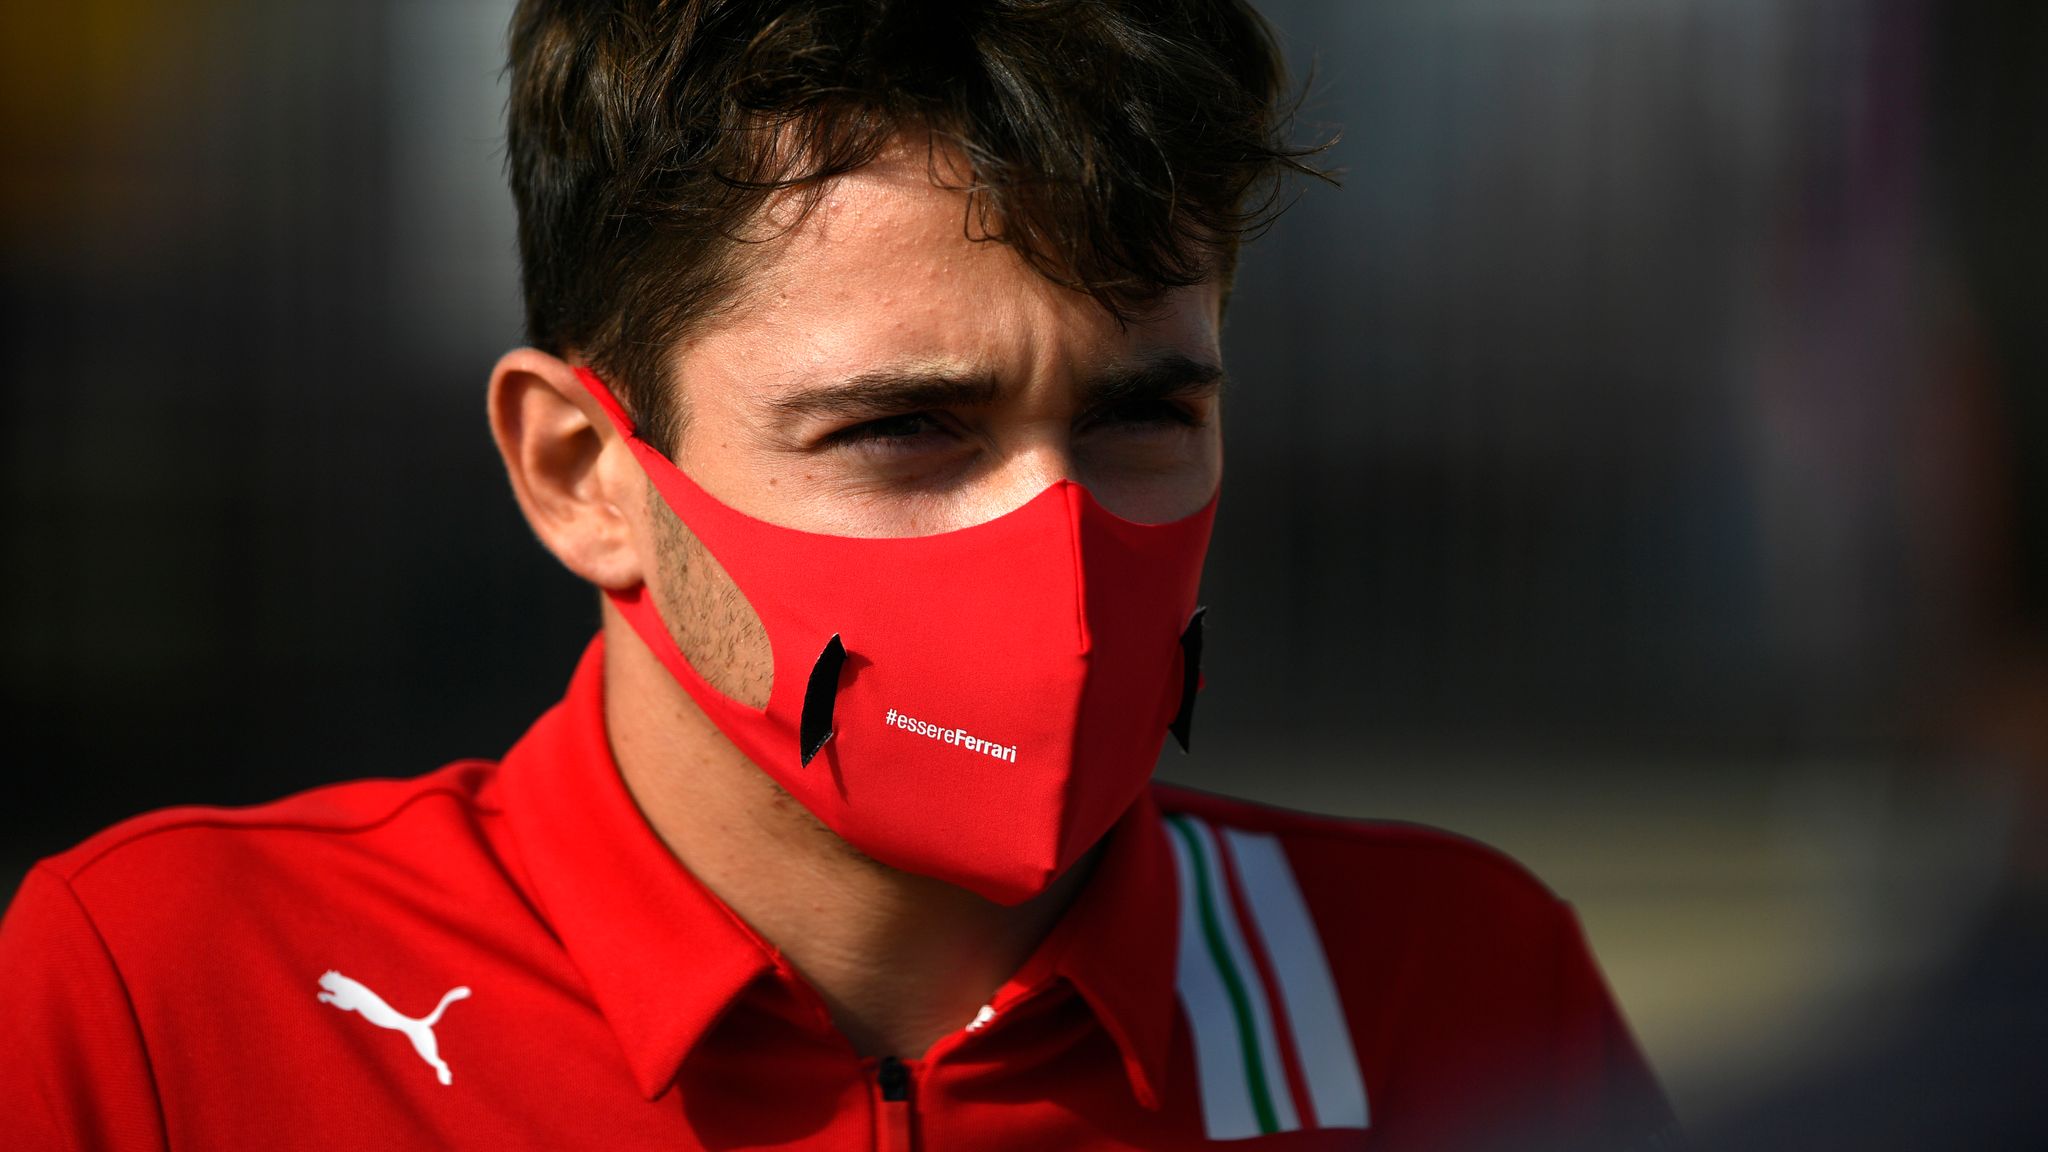 Spa return may be 'difficult' for Charles leclerc a year on from Anthoine's death